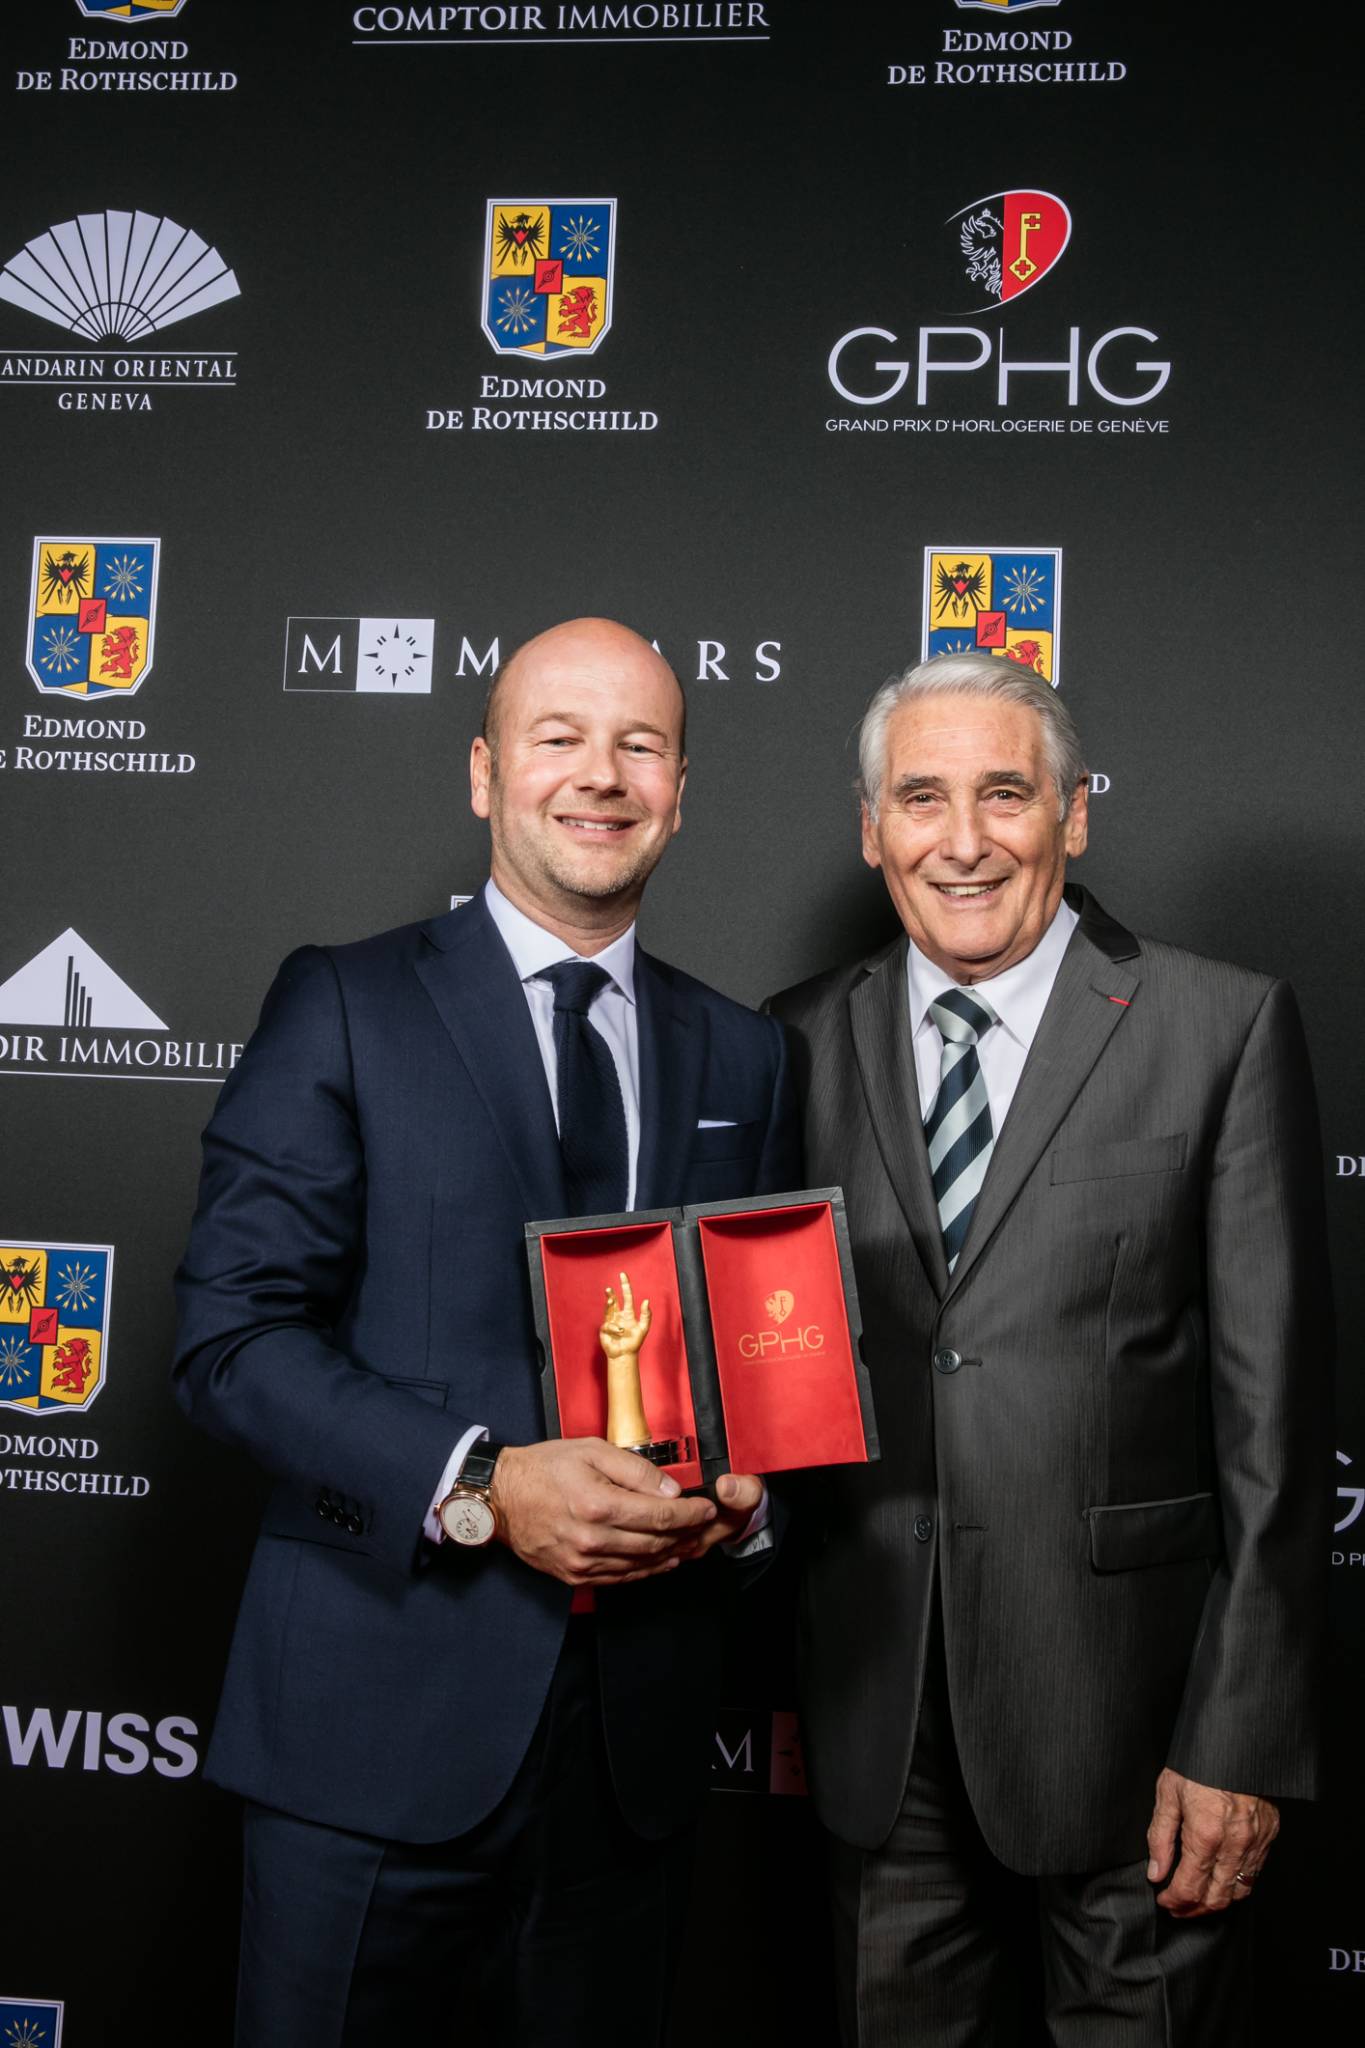 Christian Lattmann (Senior Executive Vice President of Jaquet Droz, winner of the Mechanical Exception Watch Prize 2015) and Carlo Lamprecht (President of the Foundation of the GPHG)